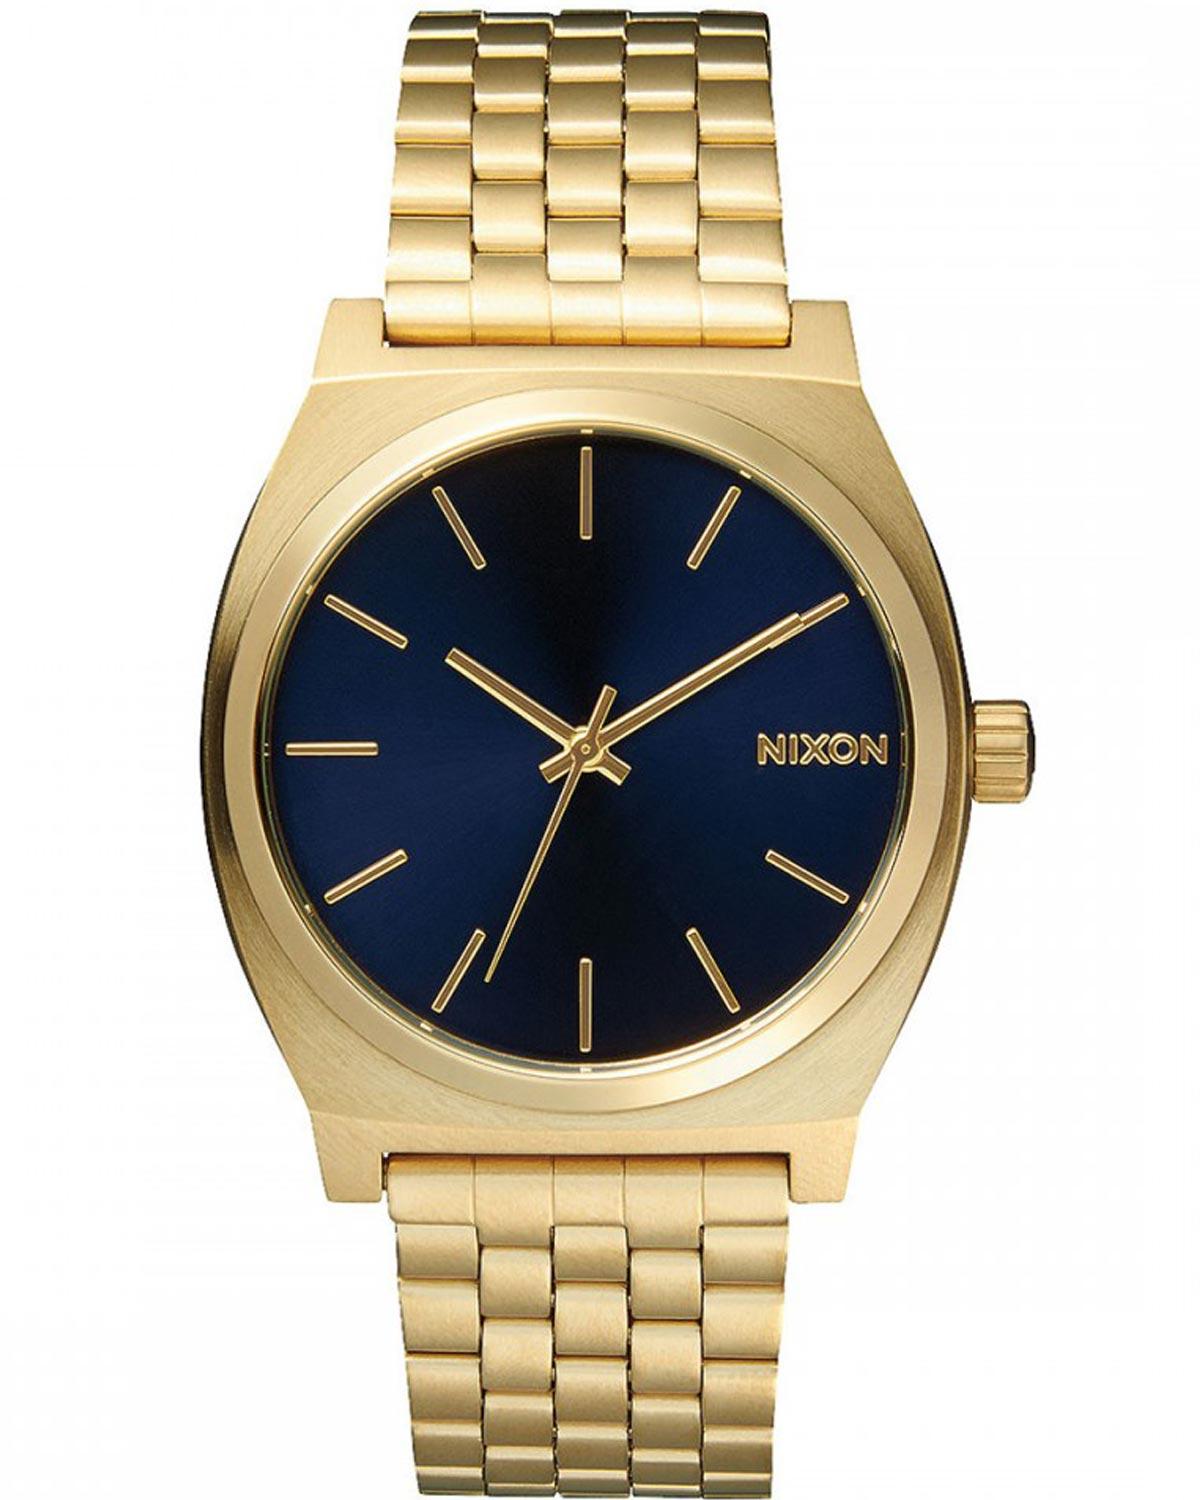 nixon time teller a045 1931 00 gold case with stainless steel bracelet image1 1